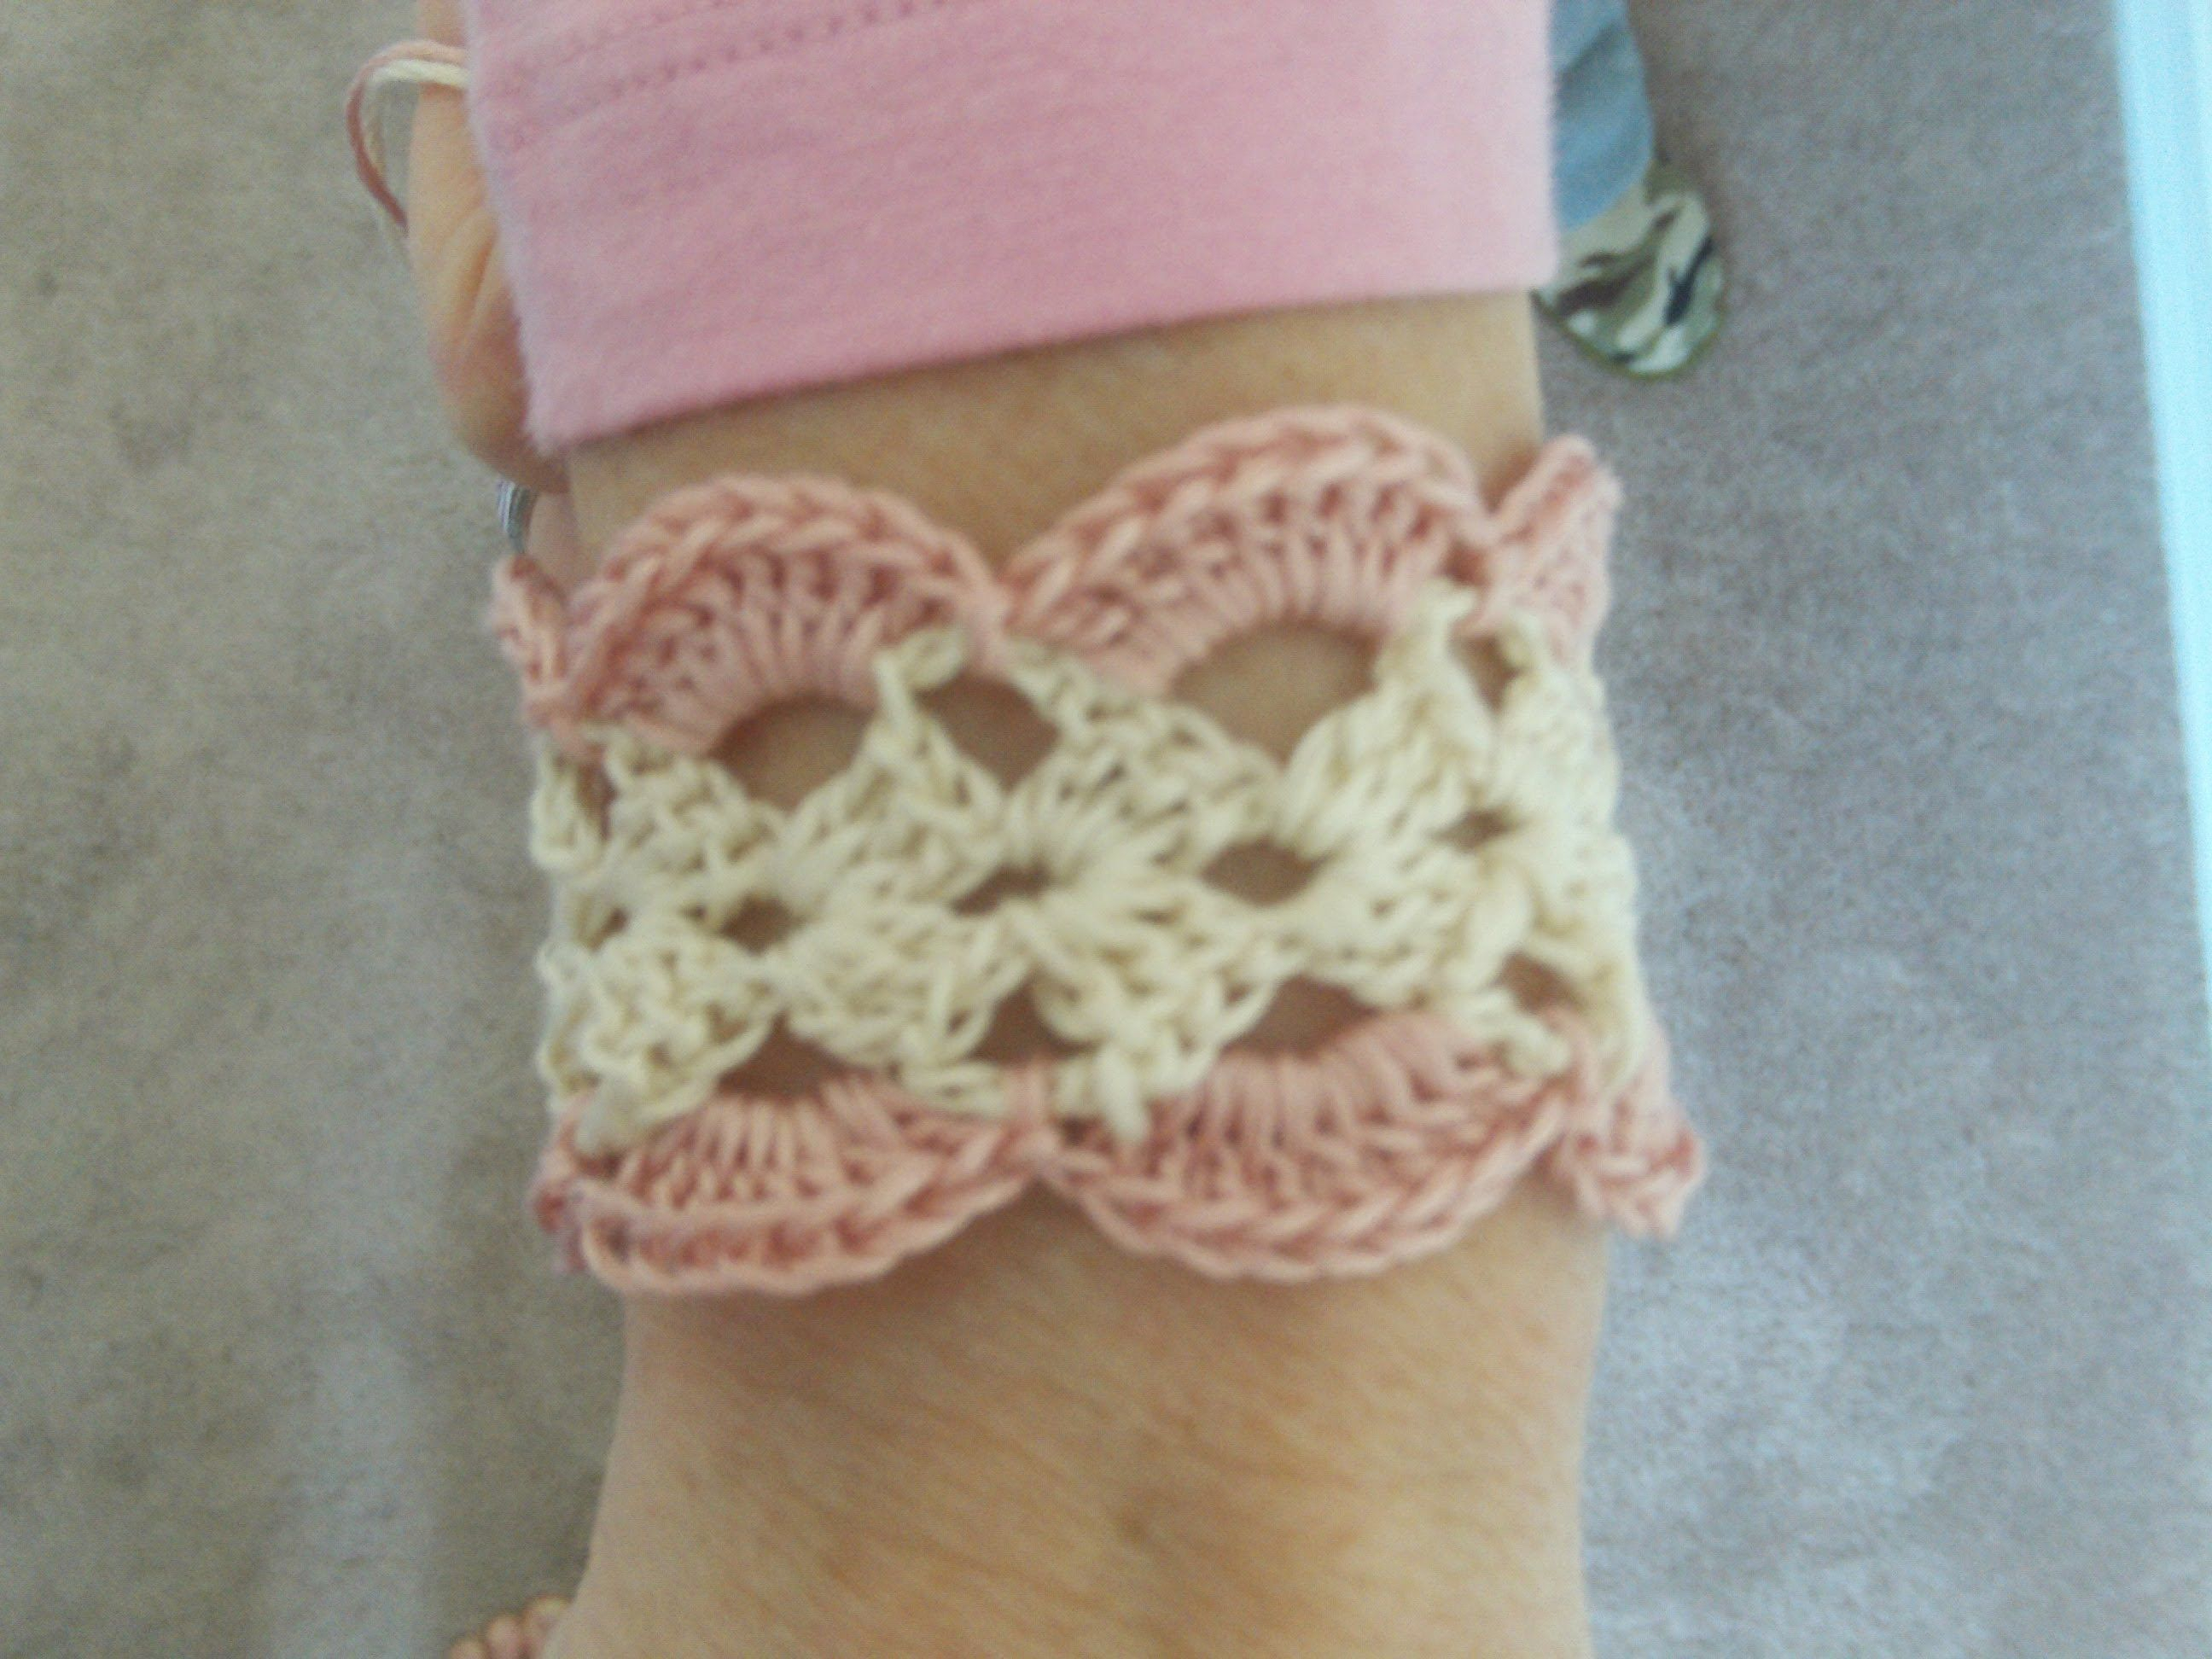 Crochet Thread Patterns How To Crochet A Bracelet Using Embroidery Thread Cotton And A 35